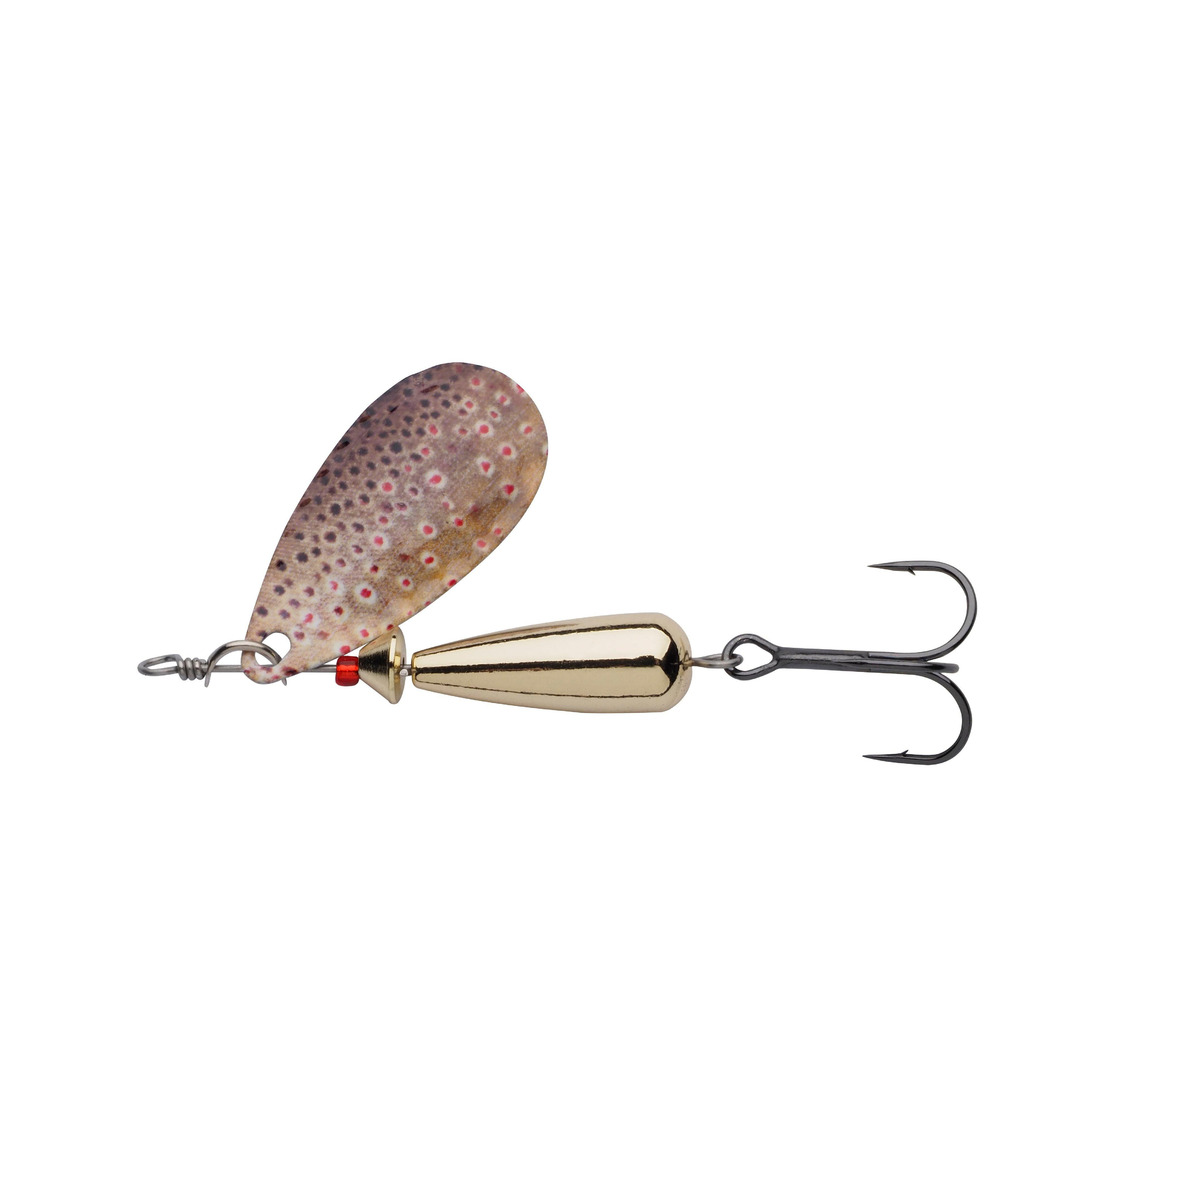 Abu Garcia Droppen Spinners 8 G - Brown Trout - 46 mm